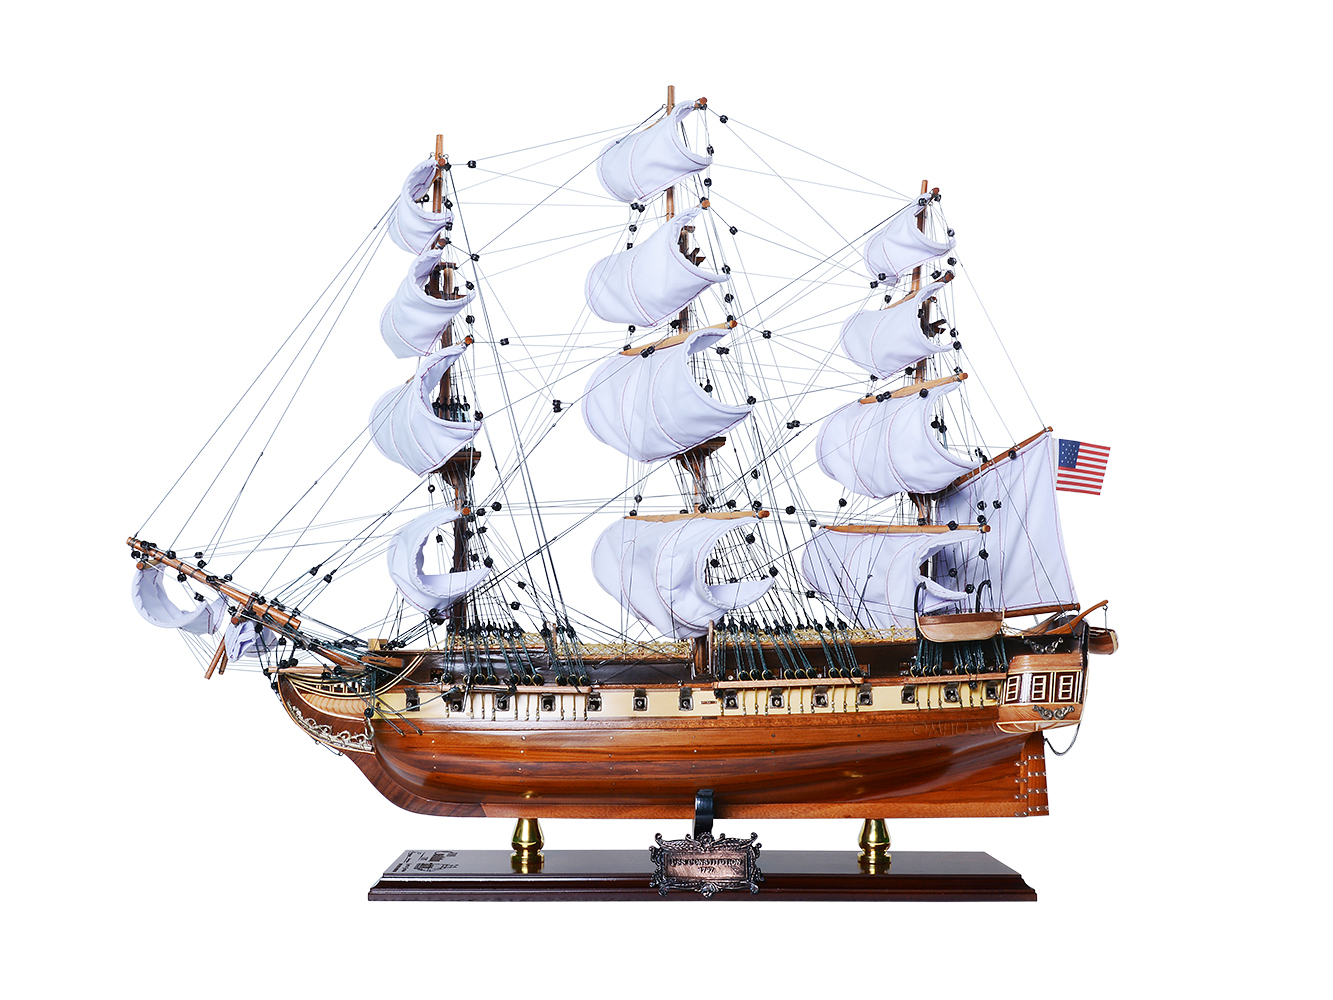 T097L USS Constitution Limited Edition Downwind Full Sails Only 100 Units Produced t097l-uss-constitution-limited-edition-downwind-full-sails-only-100-units-produced-l01.jpg